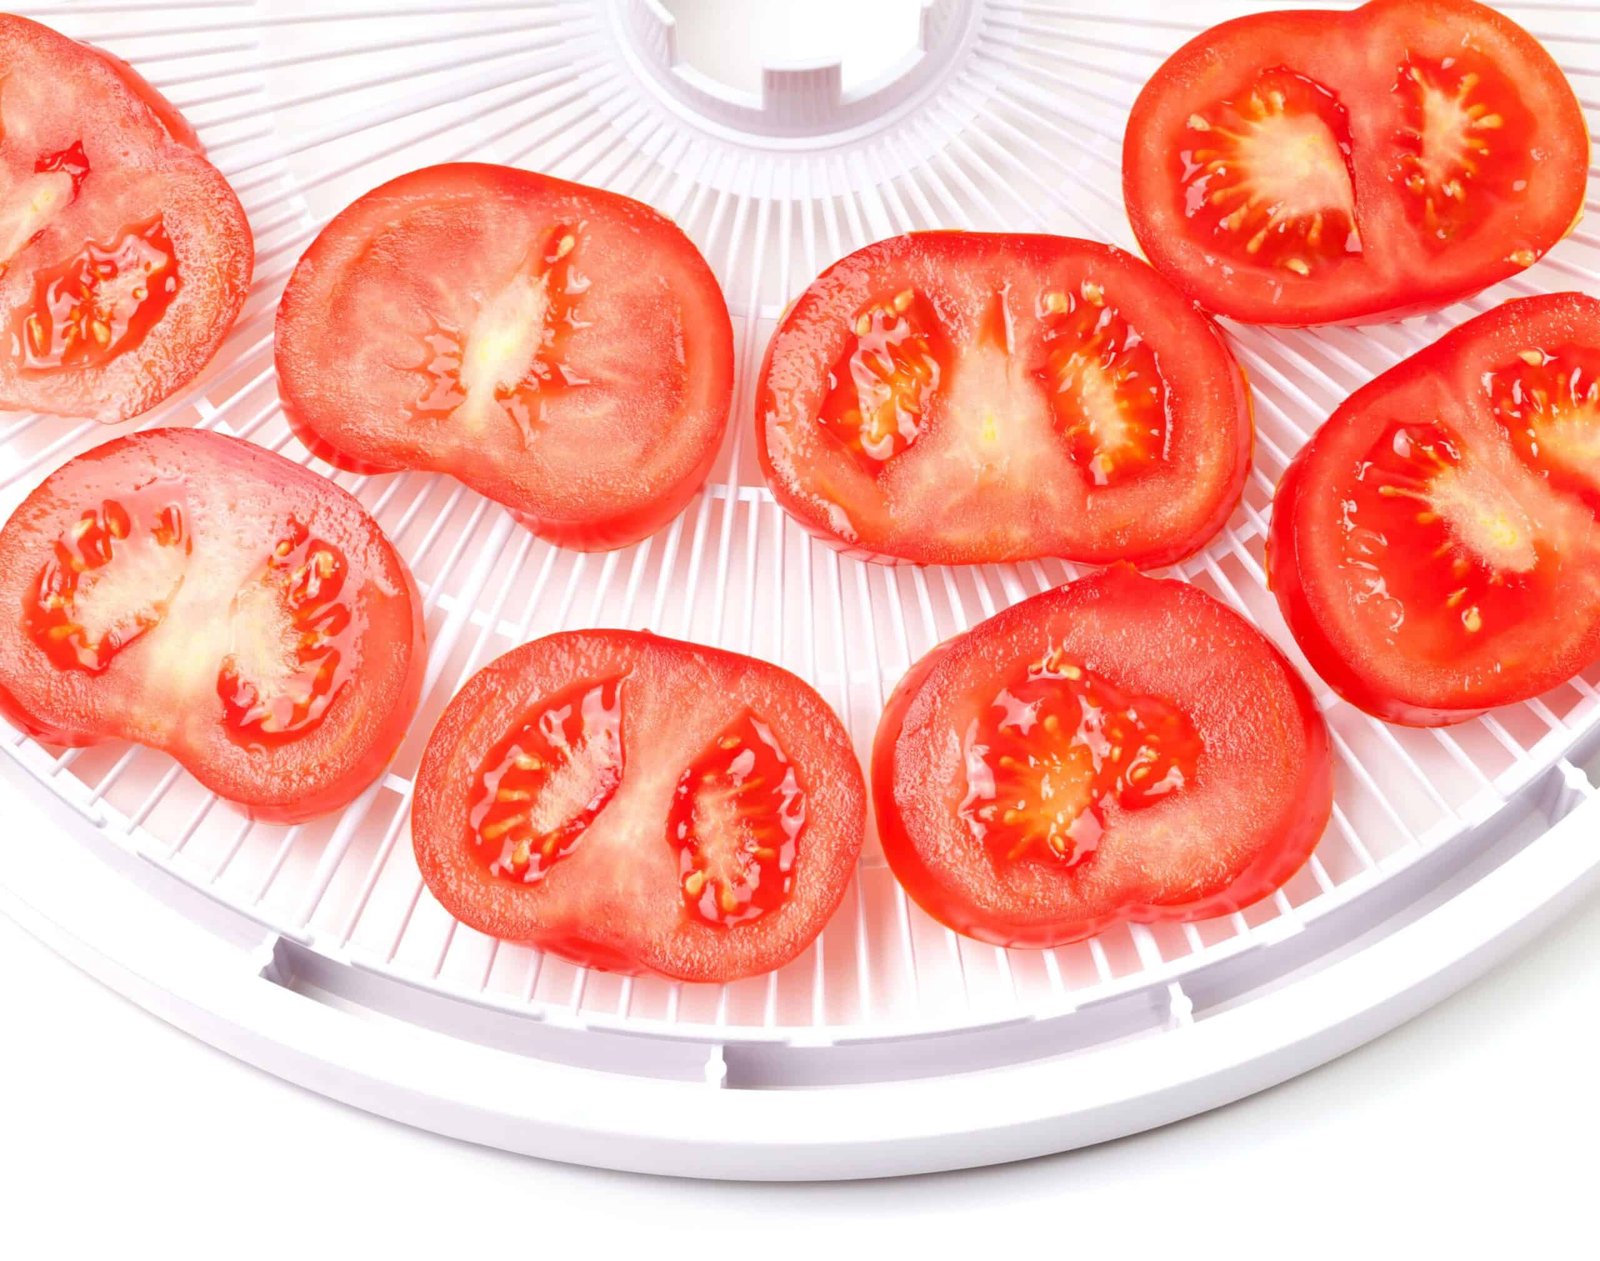 tomatoes sliced on plastic dehydrator tray with white background